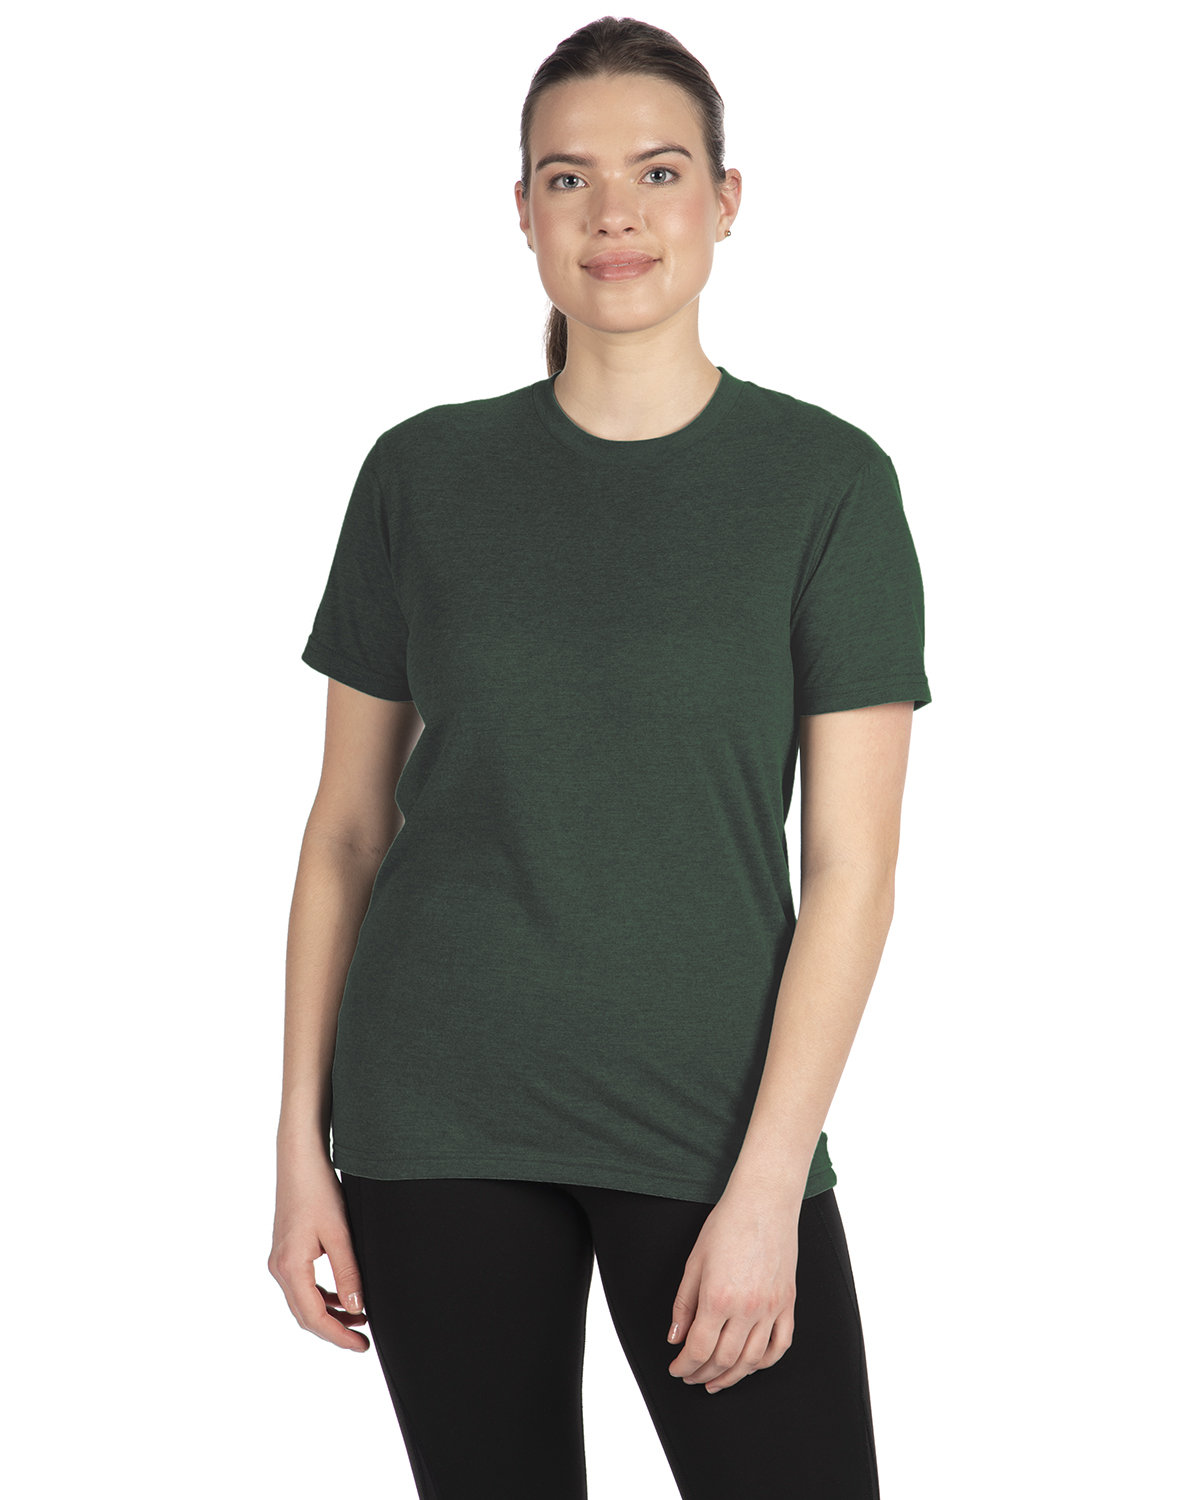 Next Level Apparel Men's Sueded Crew HTH FOREST GREEN 